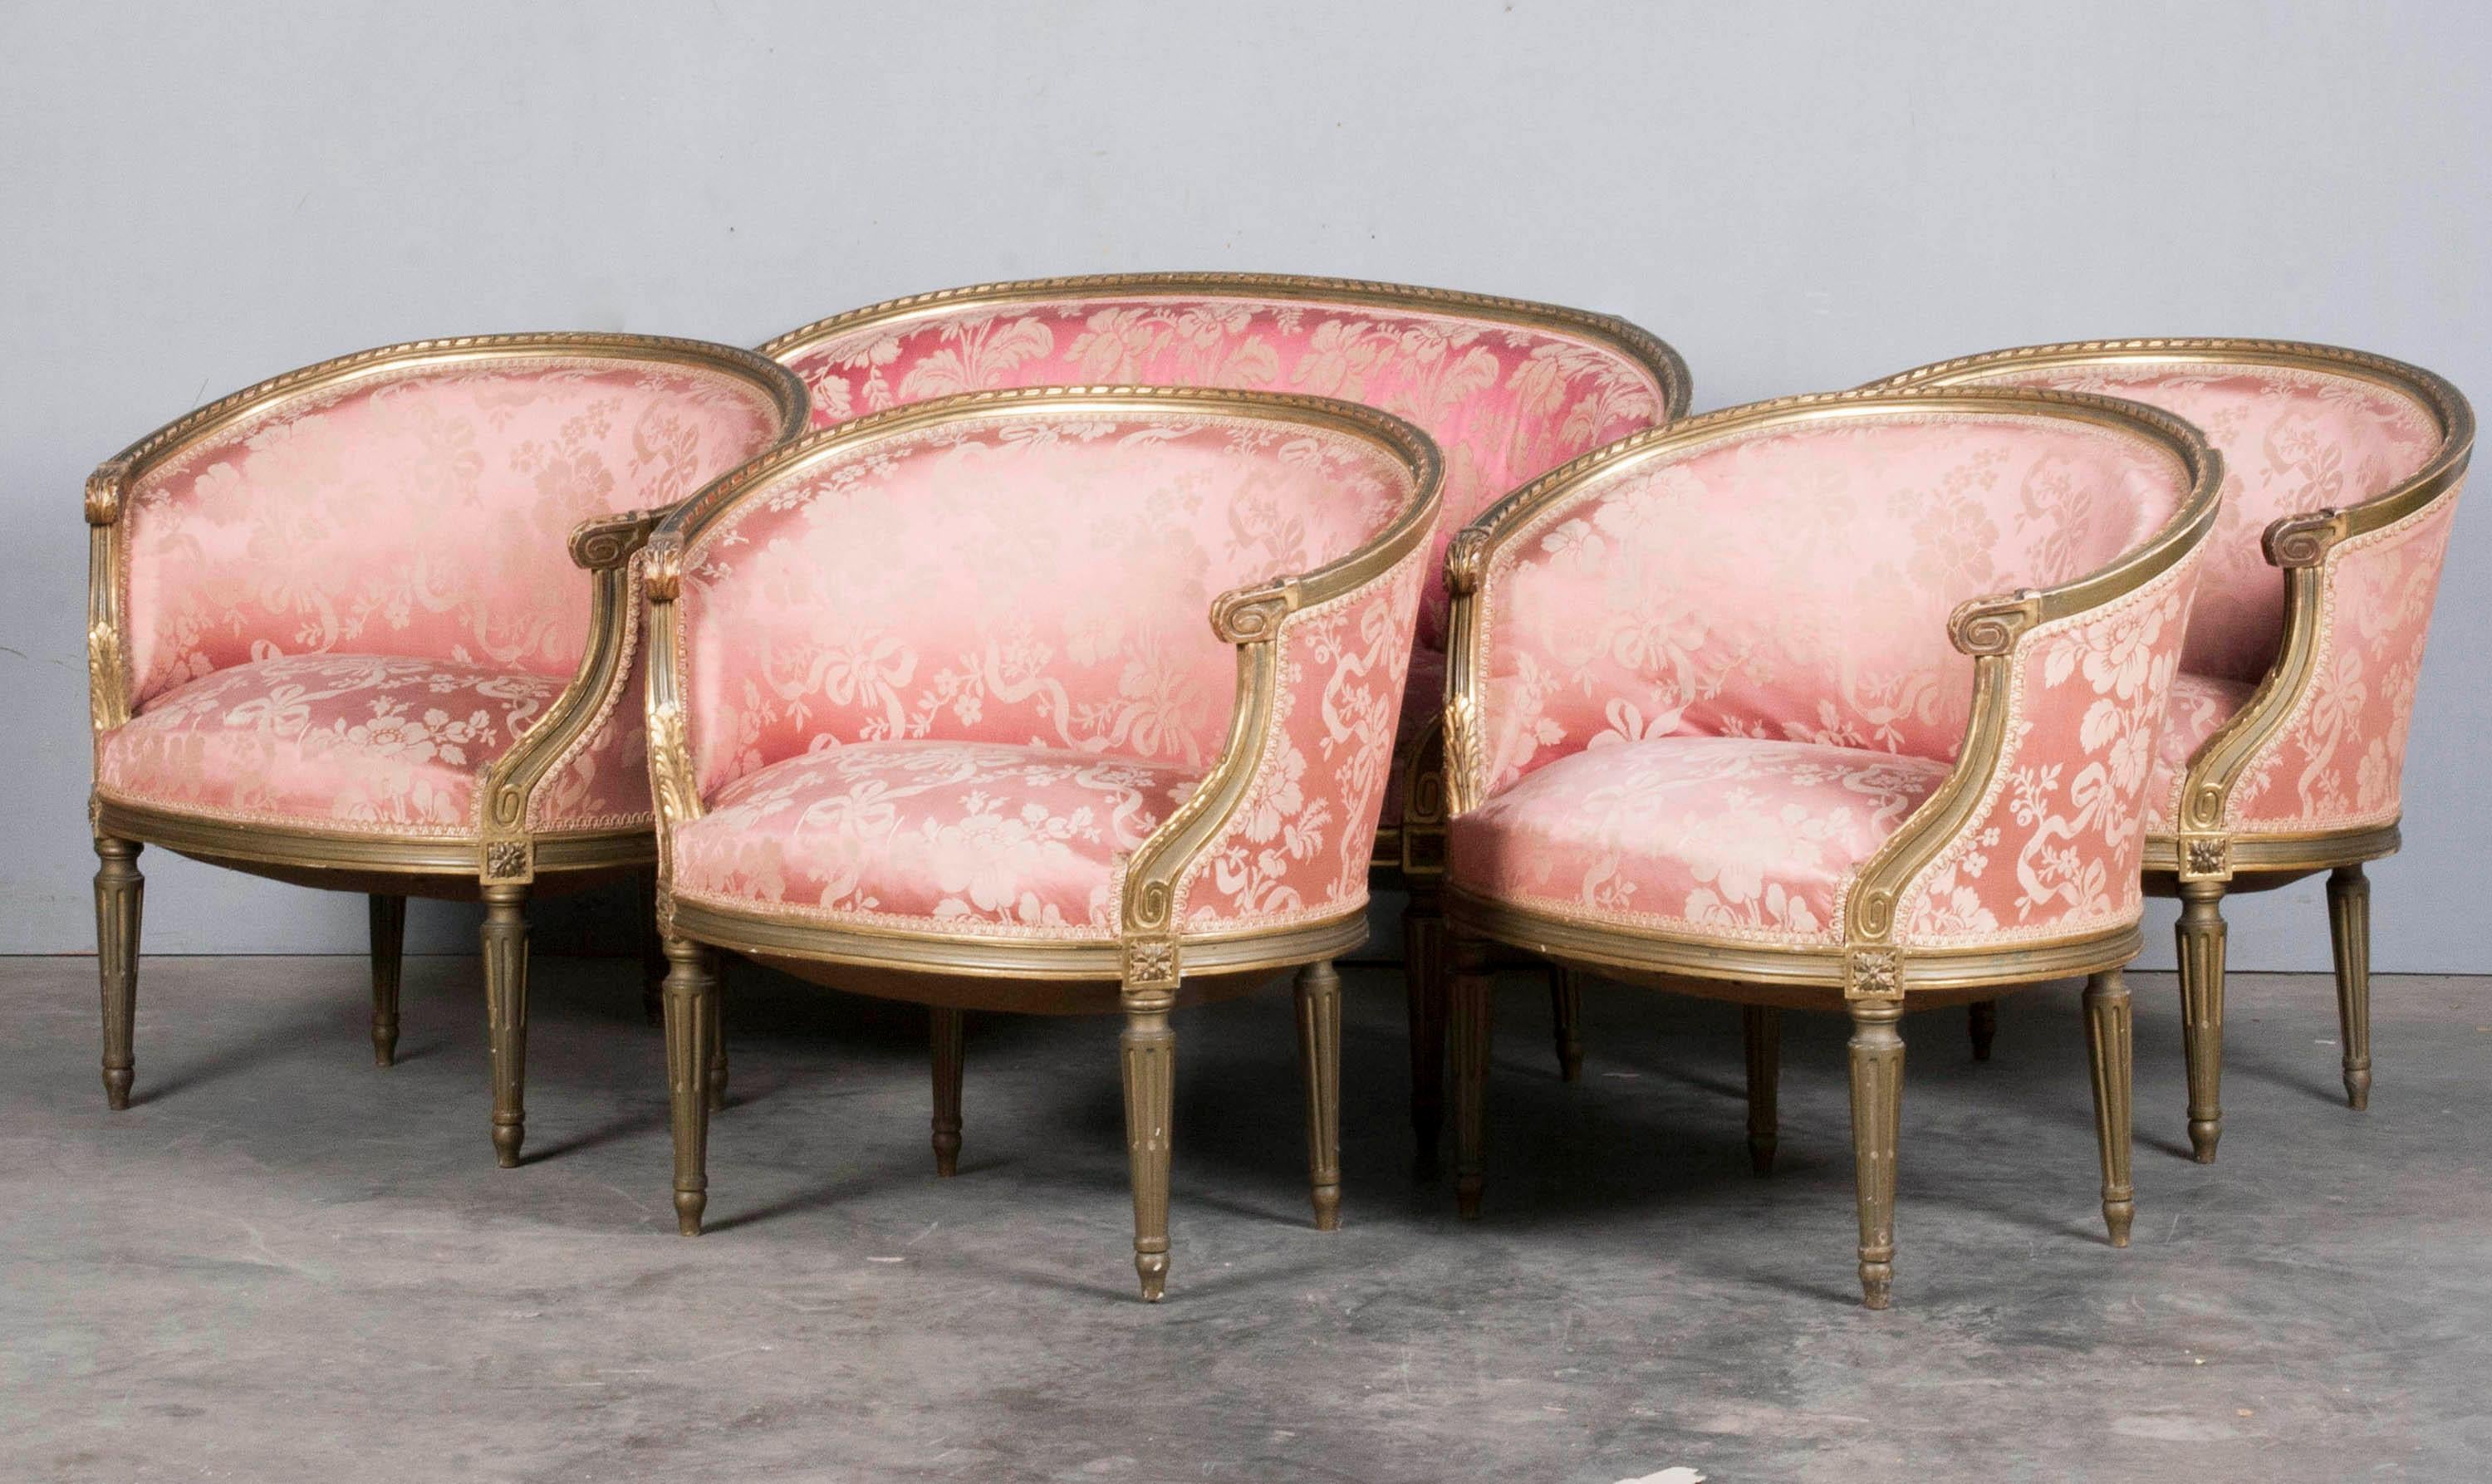 5-piece charming set of seating furniture. The set consists of 4 chairs and a sofa.
The style is Louis XVI, this can be seen from the characteristics of the rotating ribbon in the carvings.
The woodwork is partly gilt and partly green patinated.